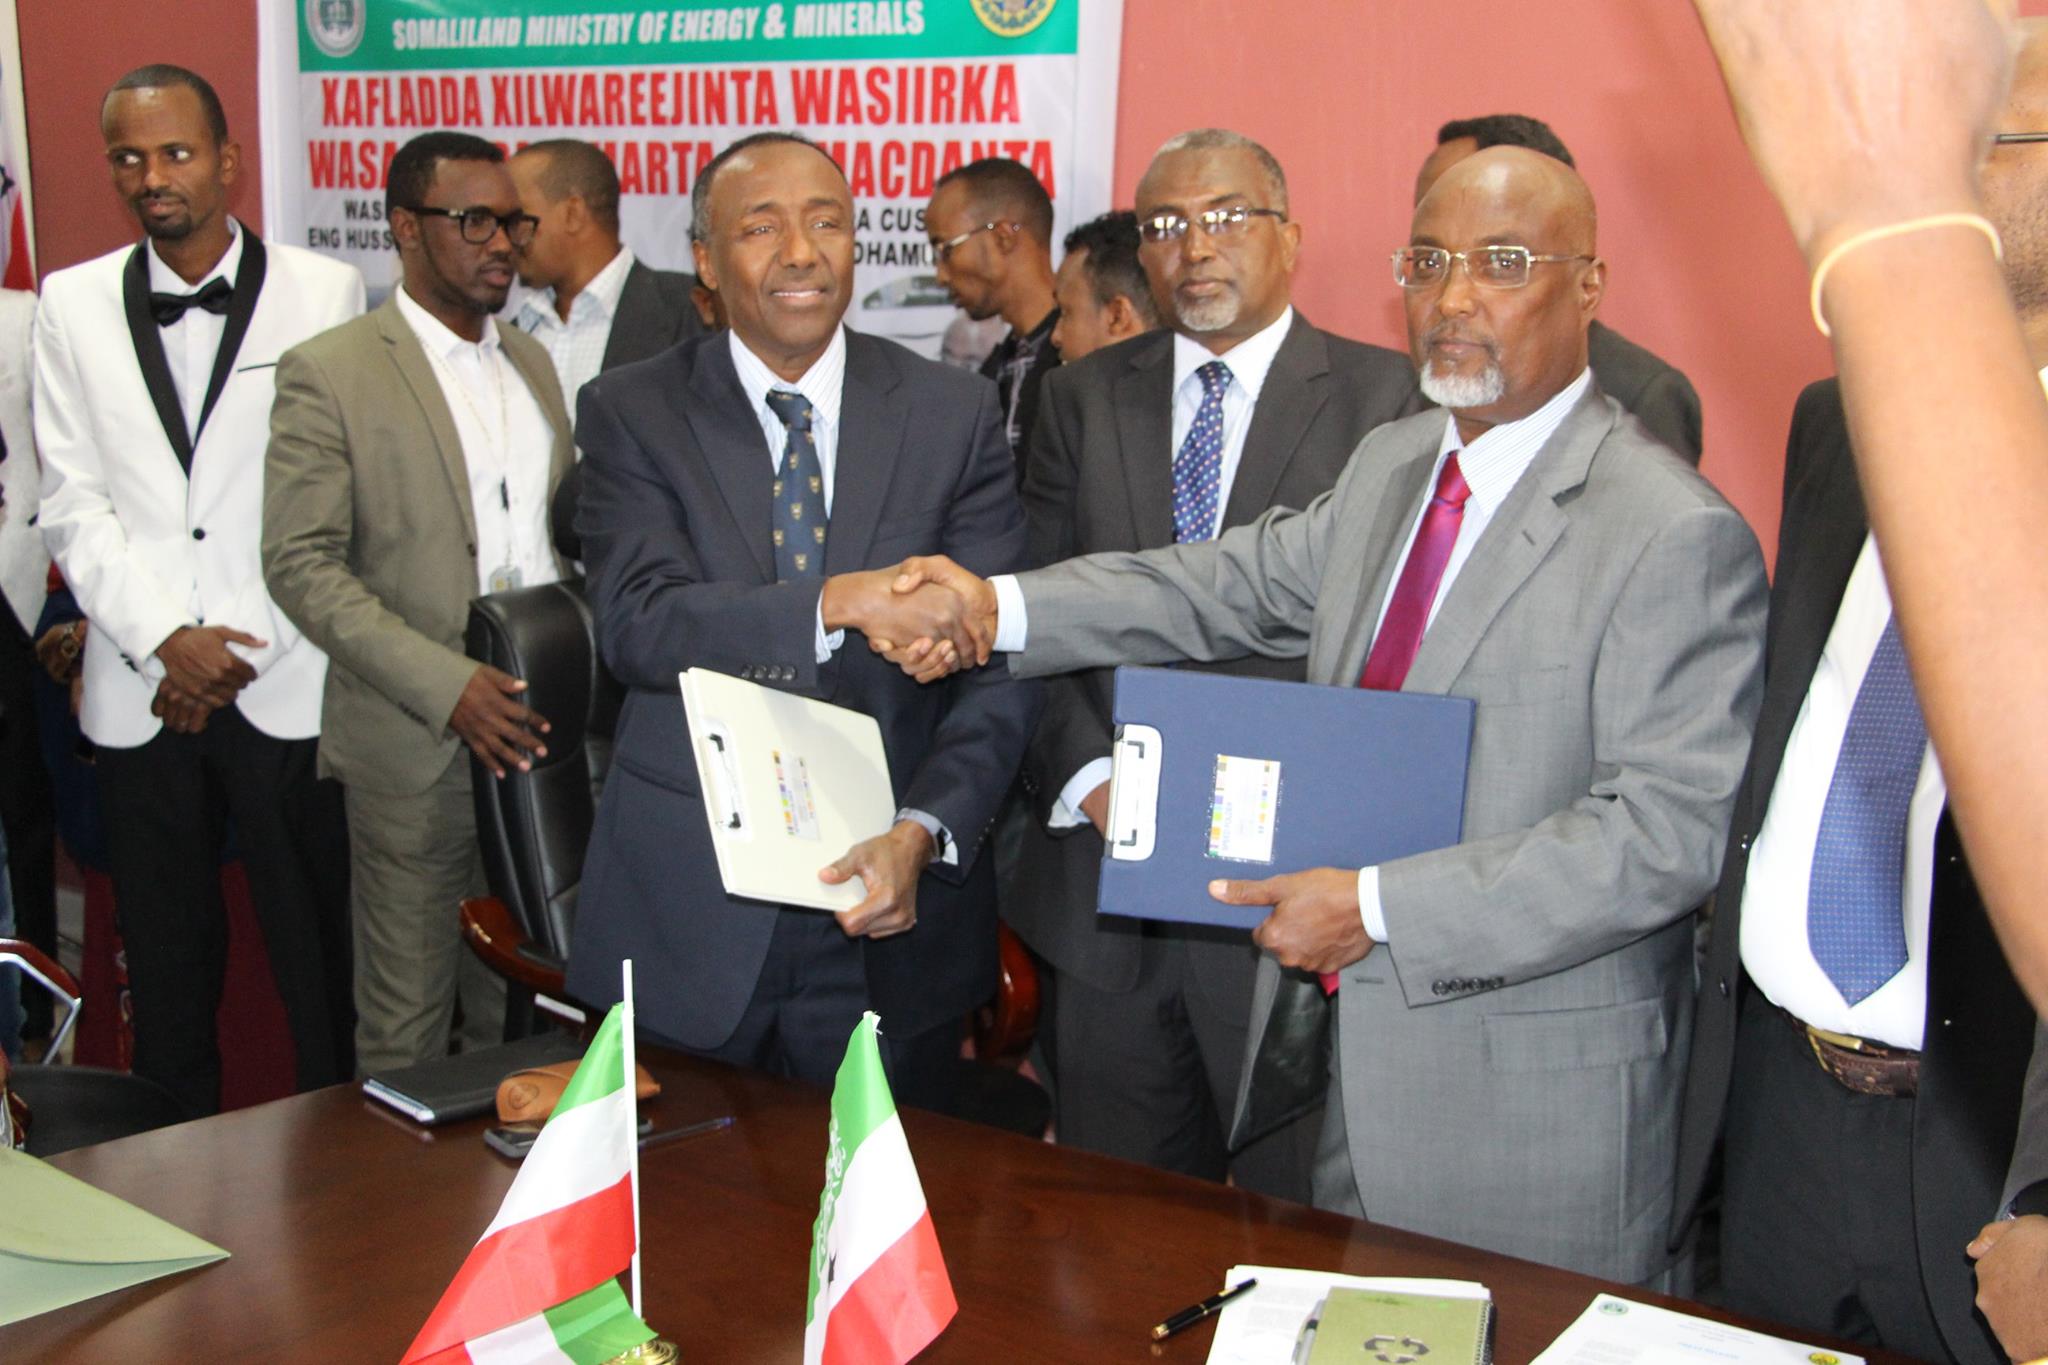 You are currently viewing Somaliland:Hon Hussein Abdi Dualeh handover the portfolio to the newly appointed Minister of Energy Hon Jama Mohmud Egal